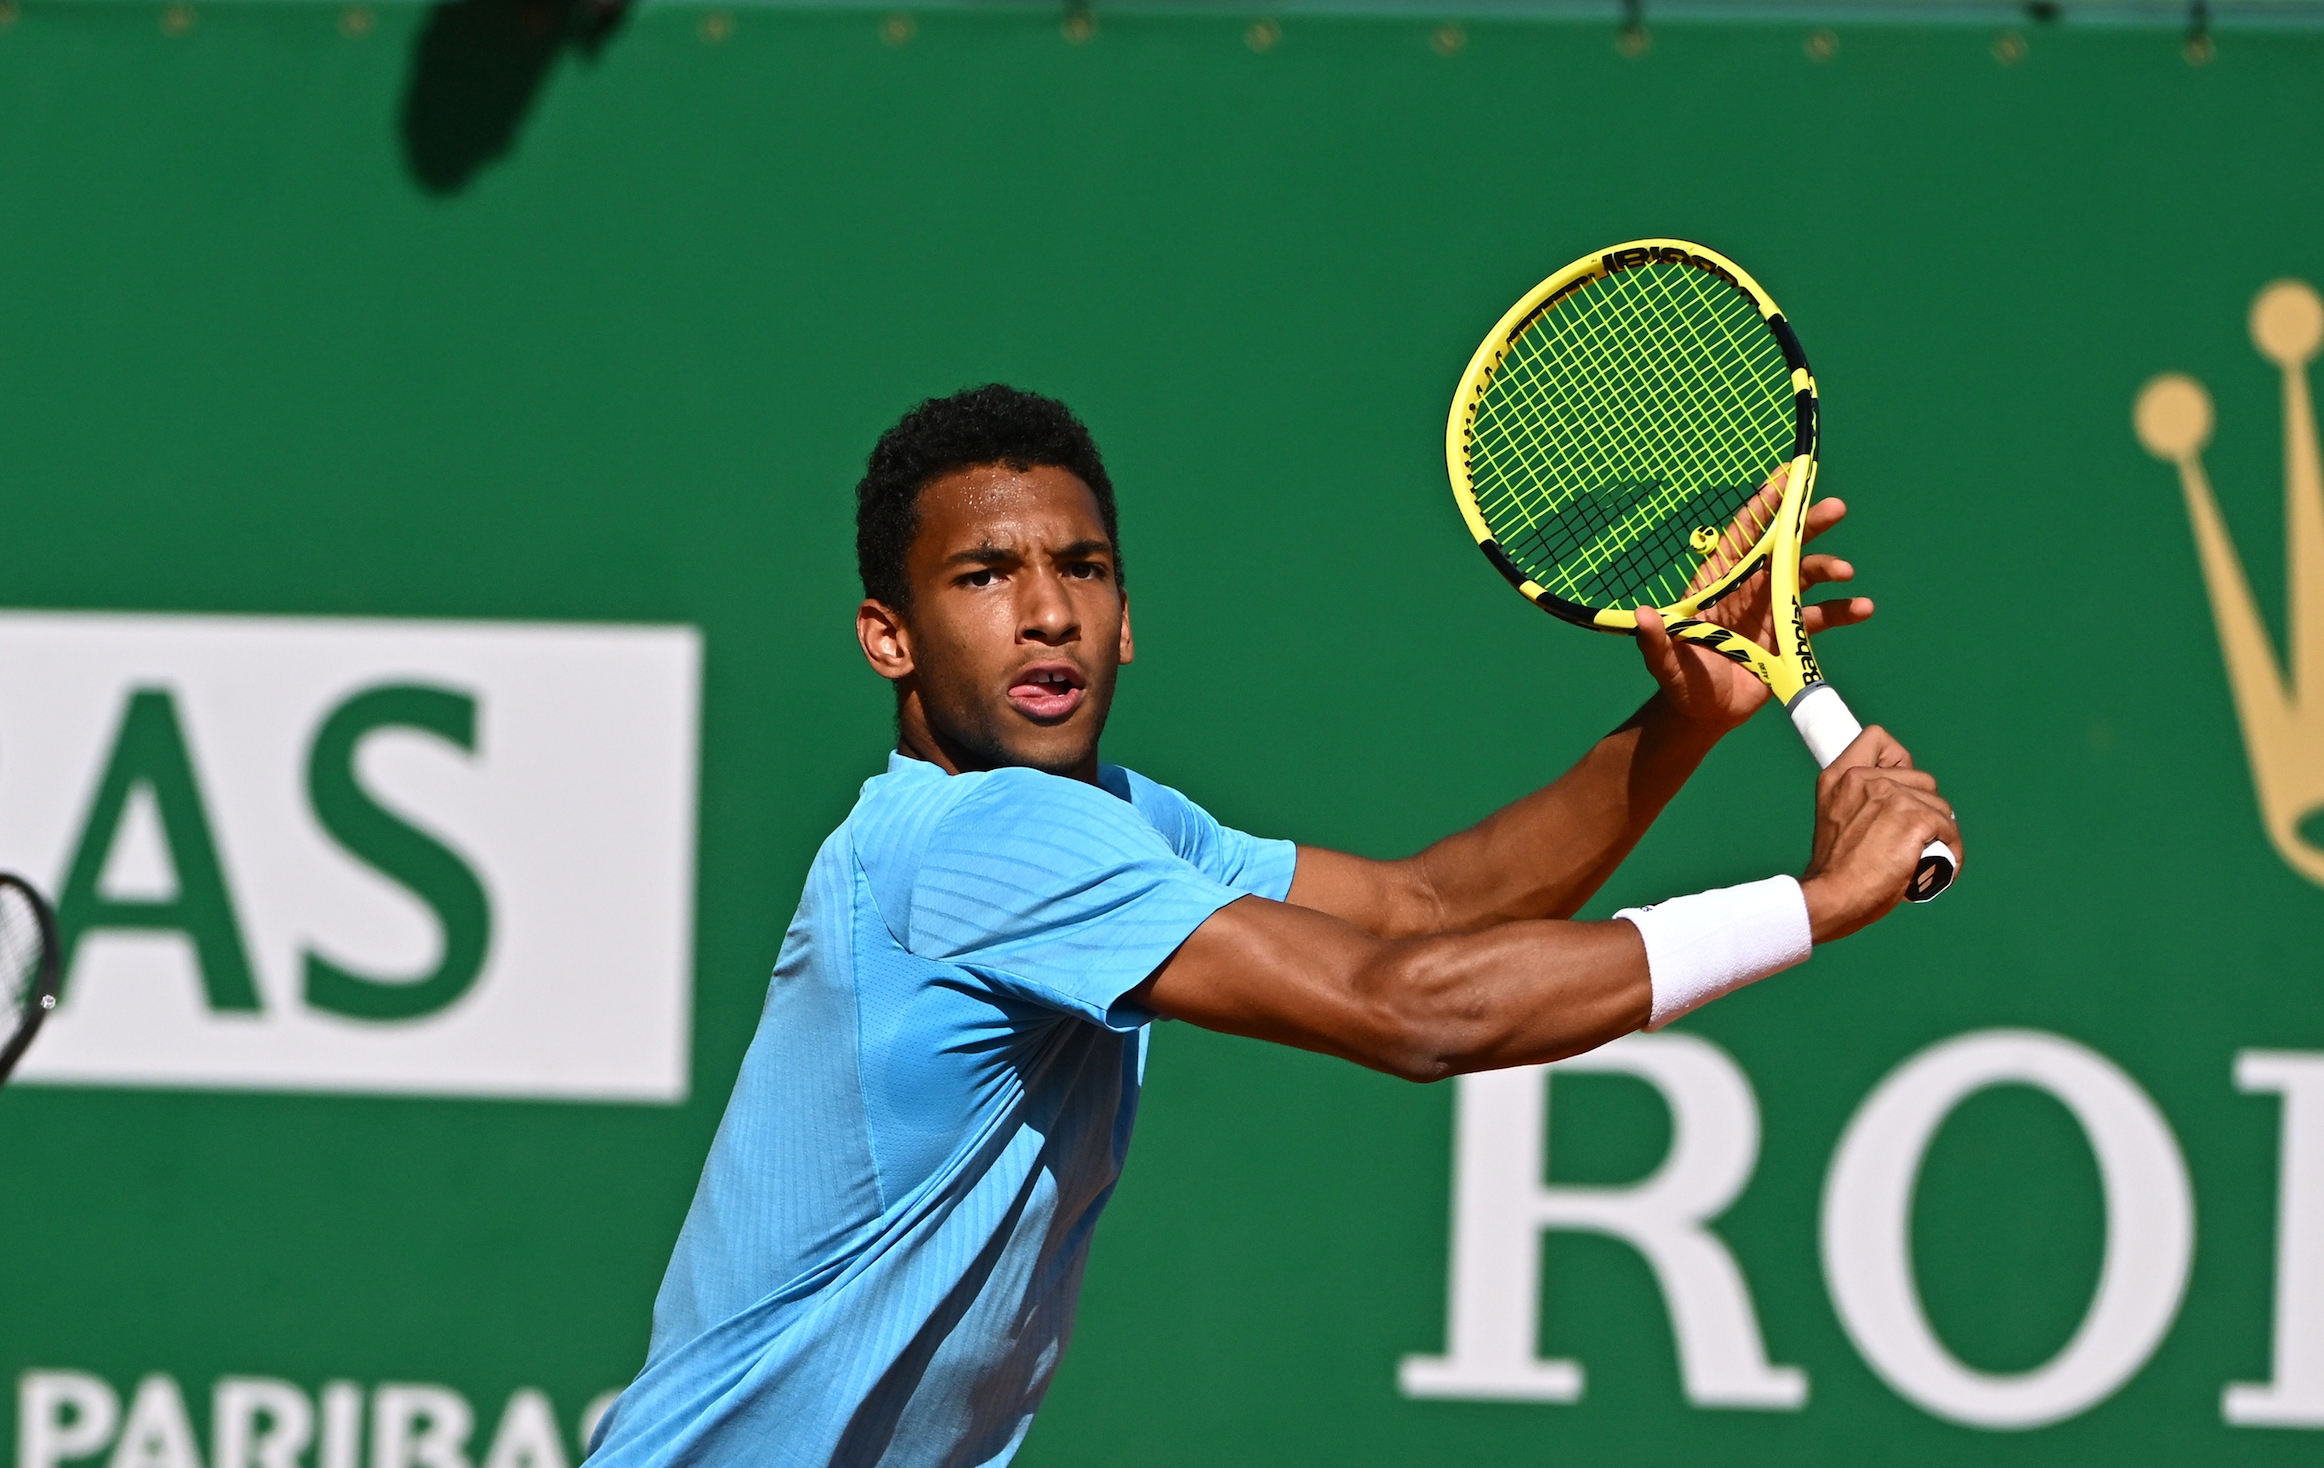 Auger-Aliassime bounced in Monte Carlo opening match